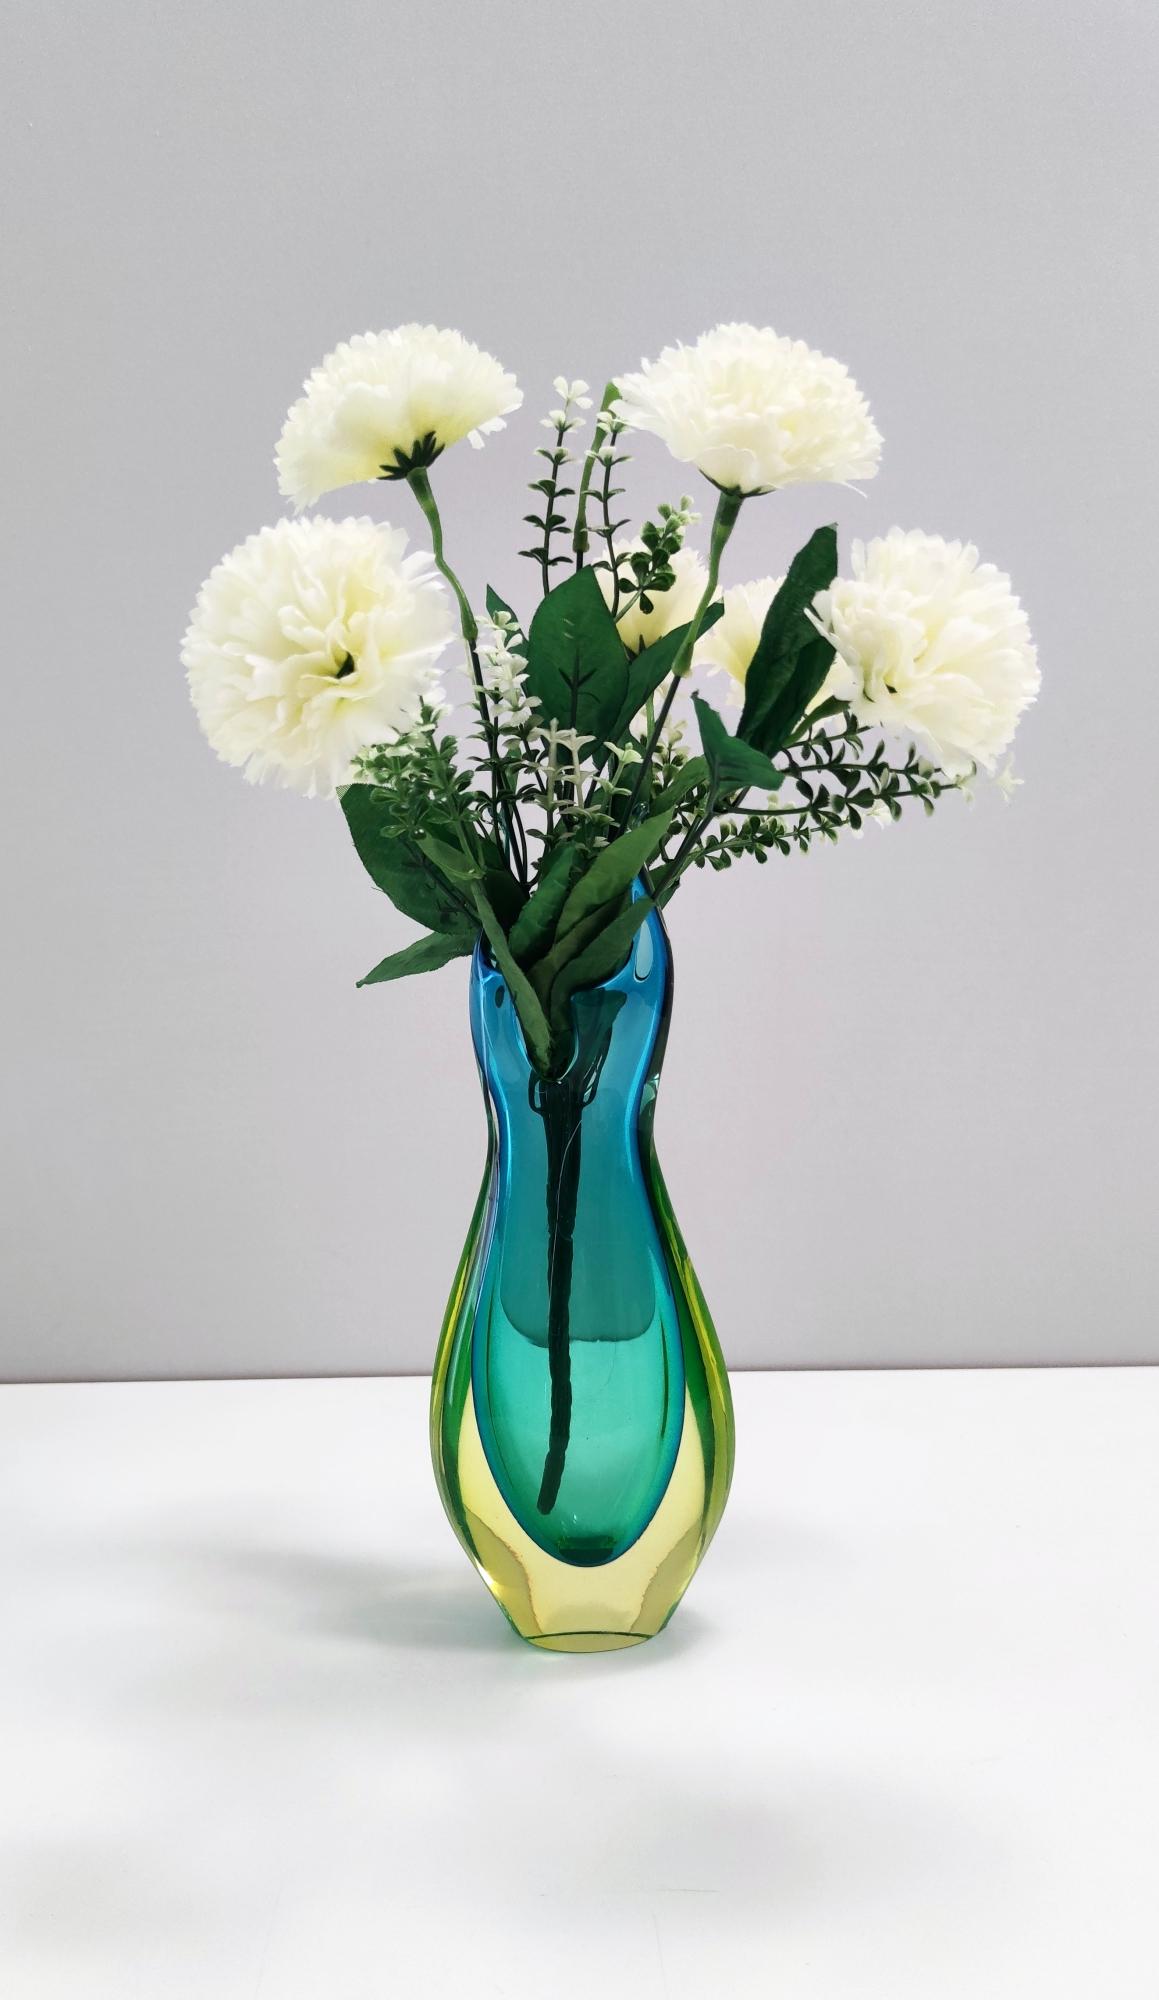 Italy, 1950s. 
This vase is made in Sommerso Murano glass. 
It is a vintage item, therefore it might show slight traces of use, but it can be considered as in perfect original condition and ready to become a piece in a home. 

Measures:
Width